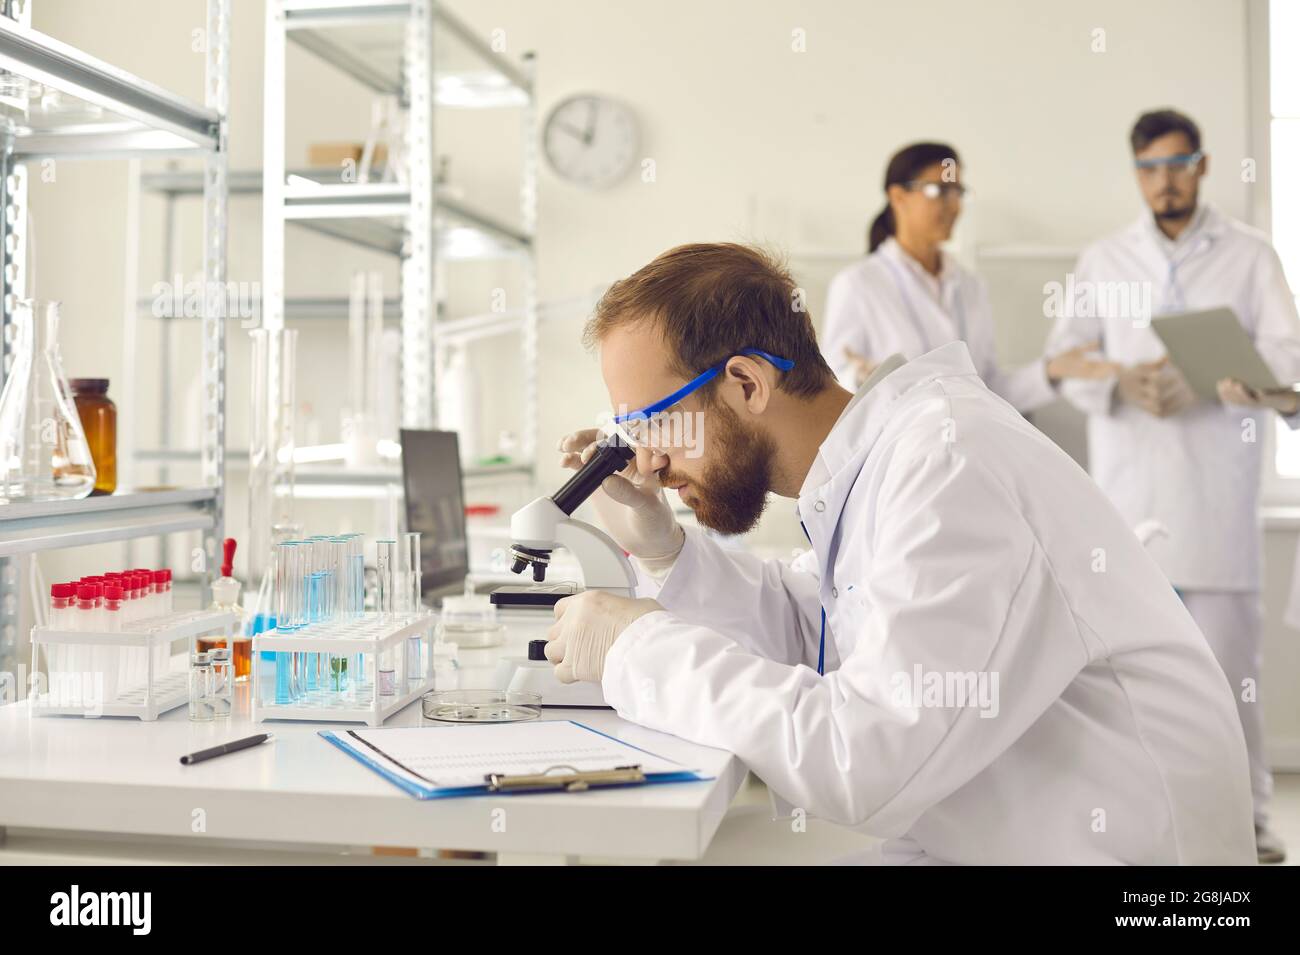 Professional male scientist looking through microscope in research laboratory Stock Photo